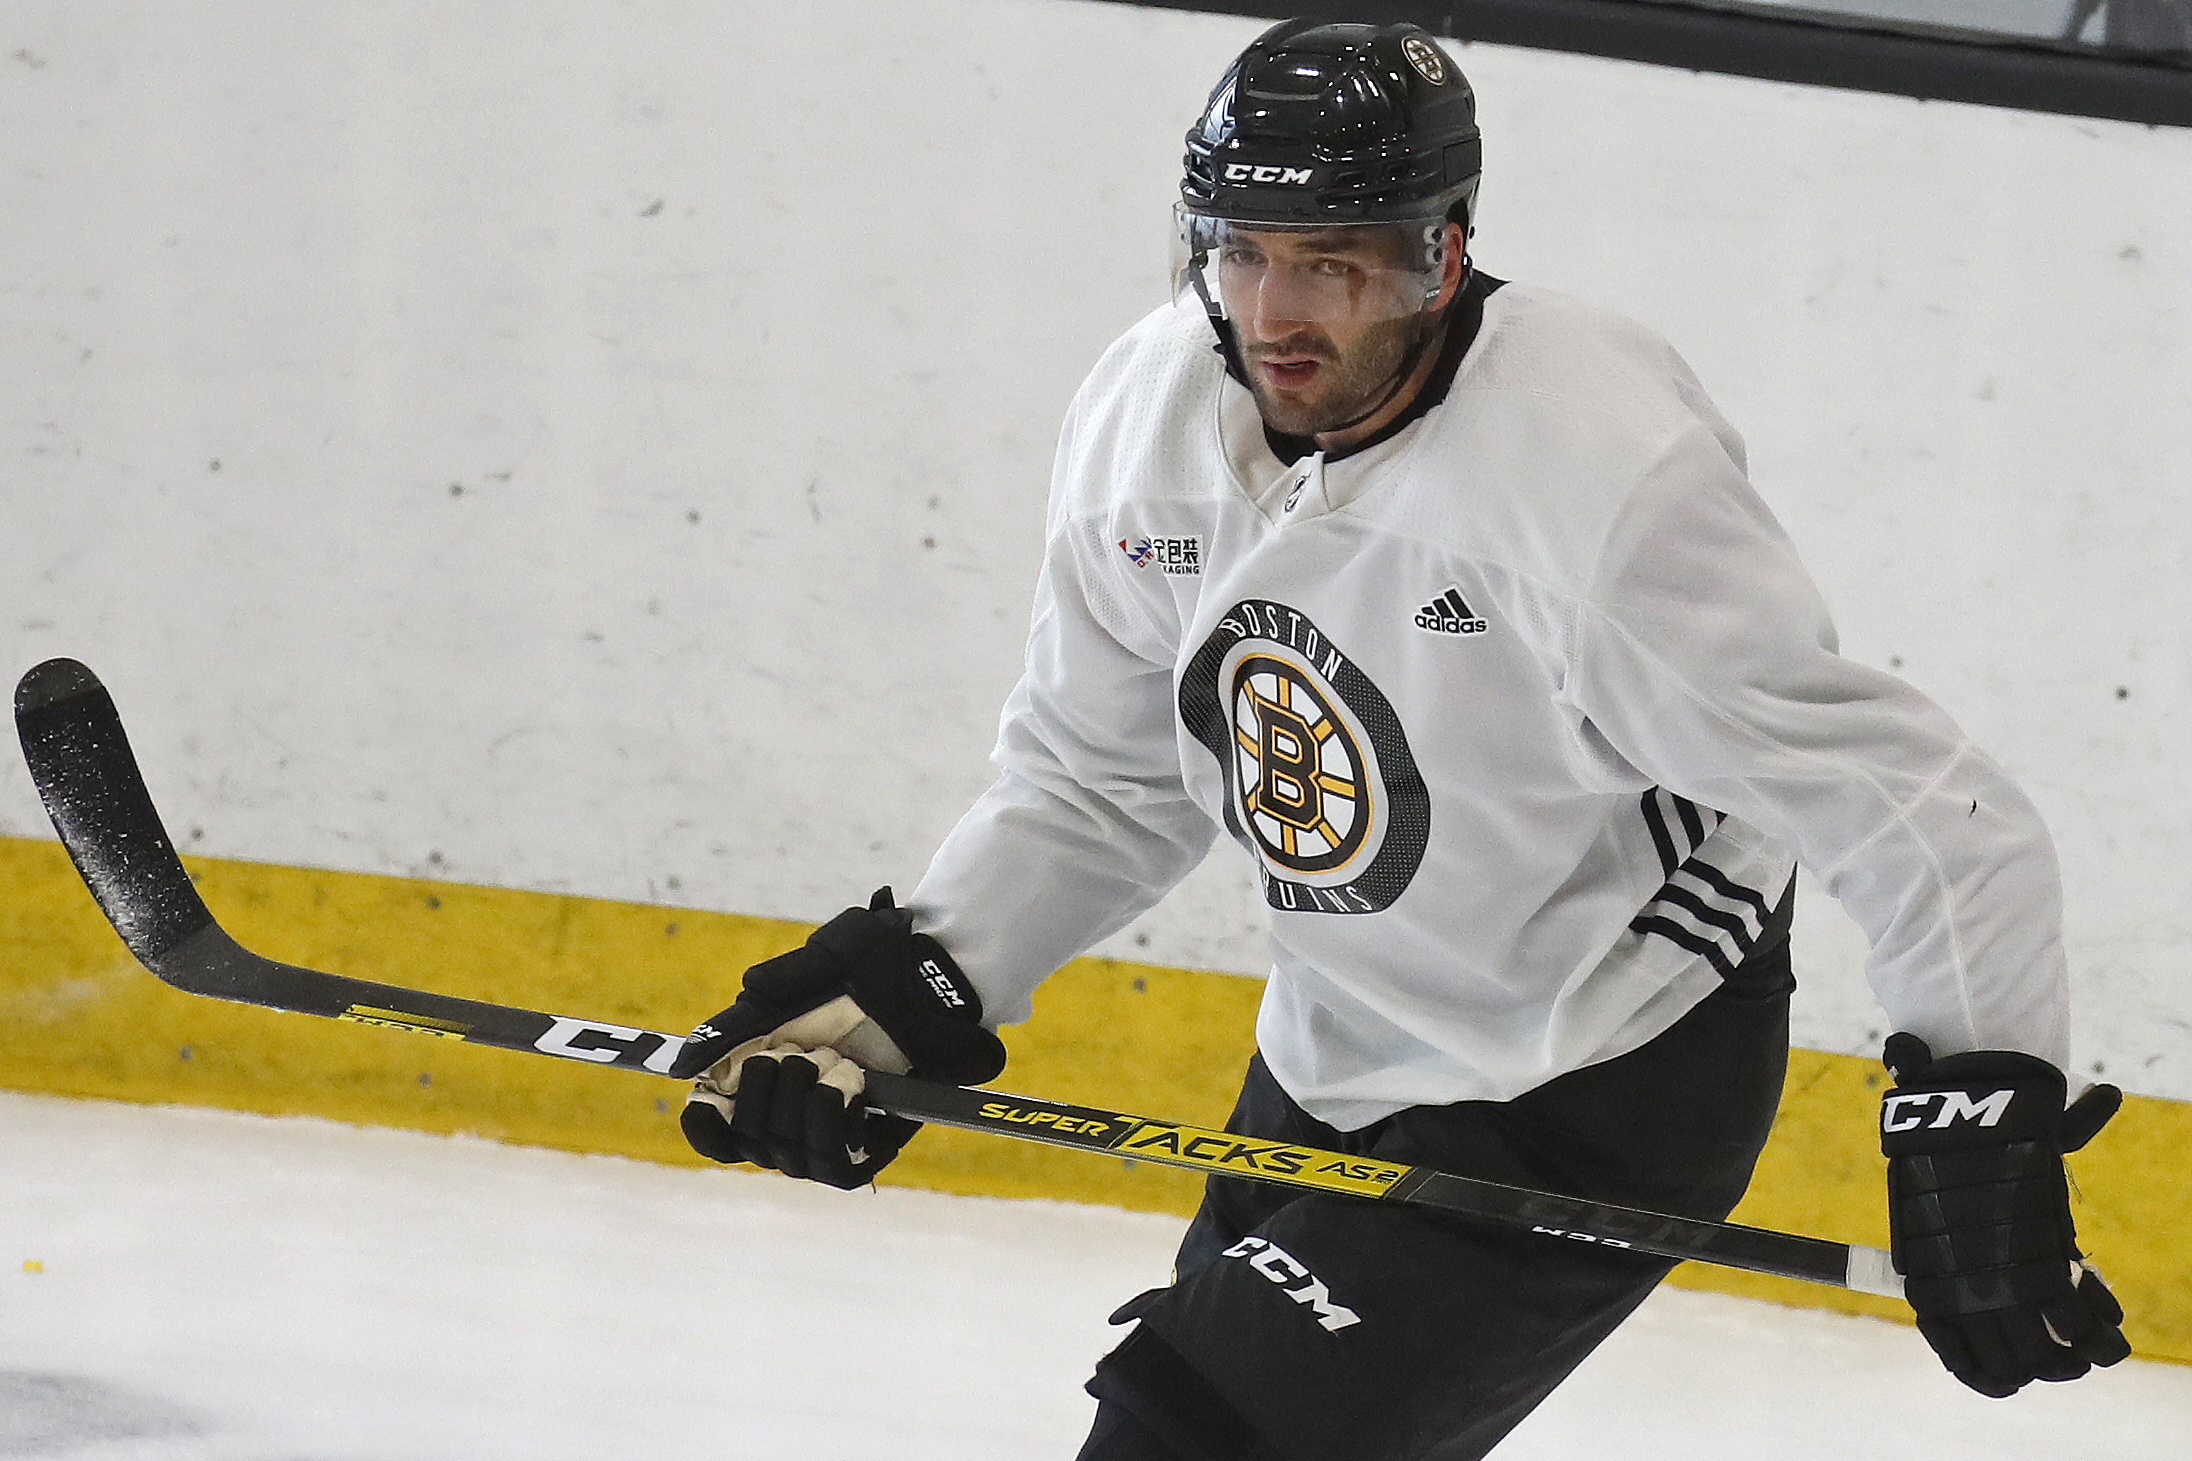 Ranking the top 10 Boston Bruins players of all-time ft. Patrice Bergeron